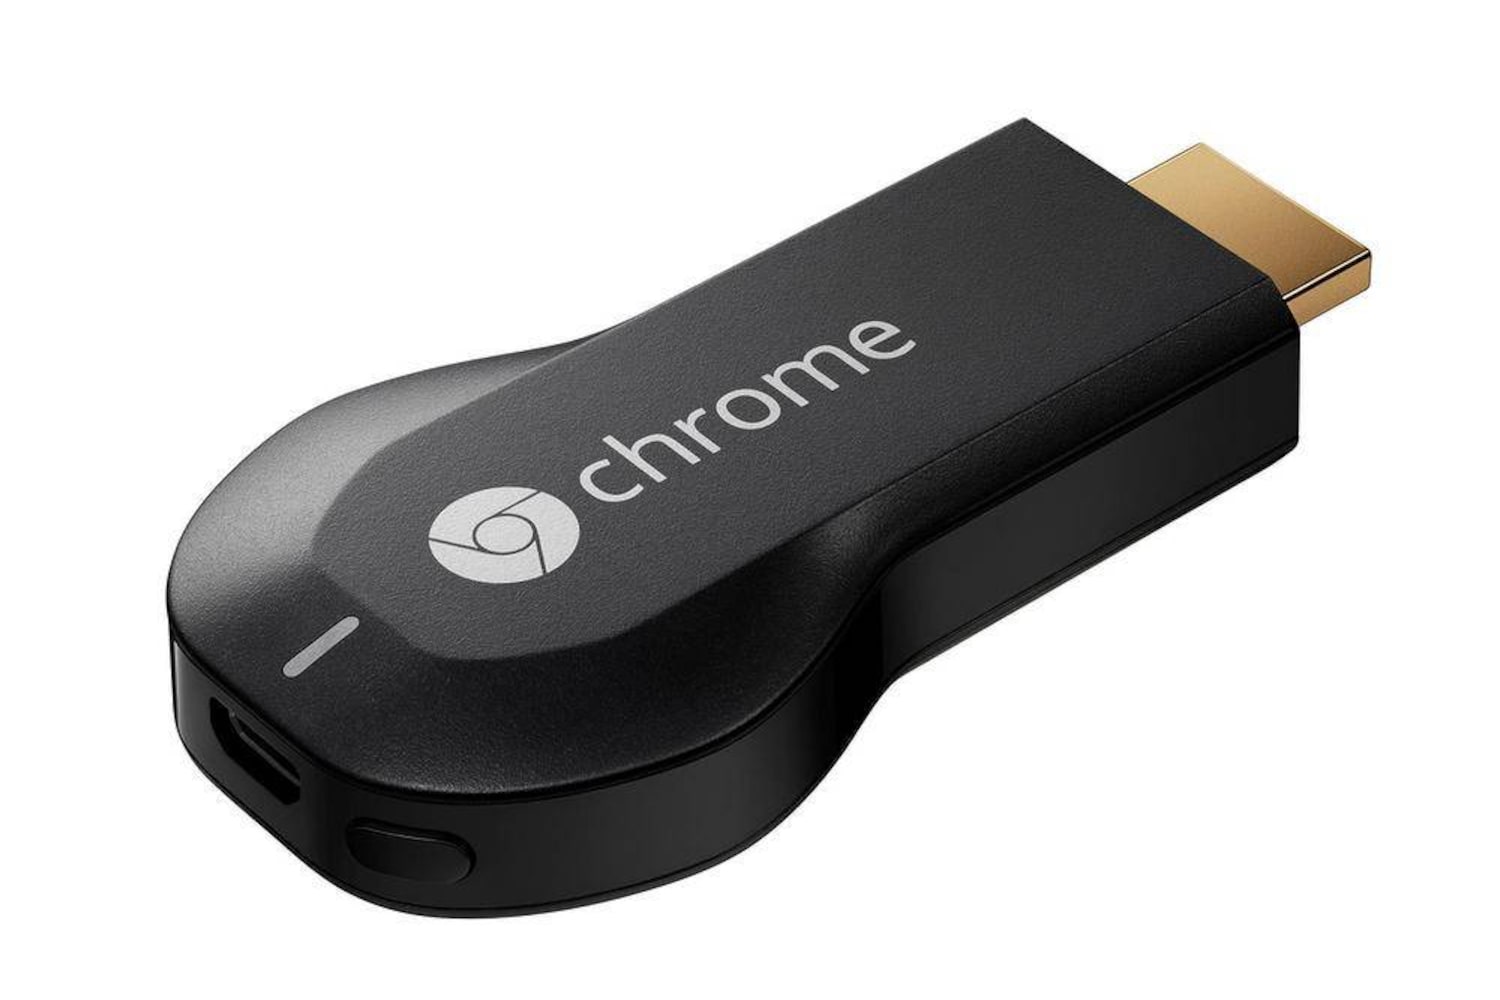 Review: Is Google Chromecast worth its low price? - The Globe and Mail